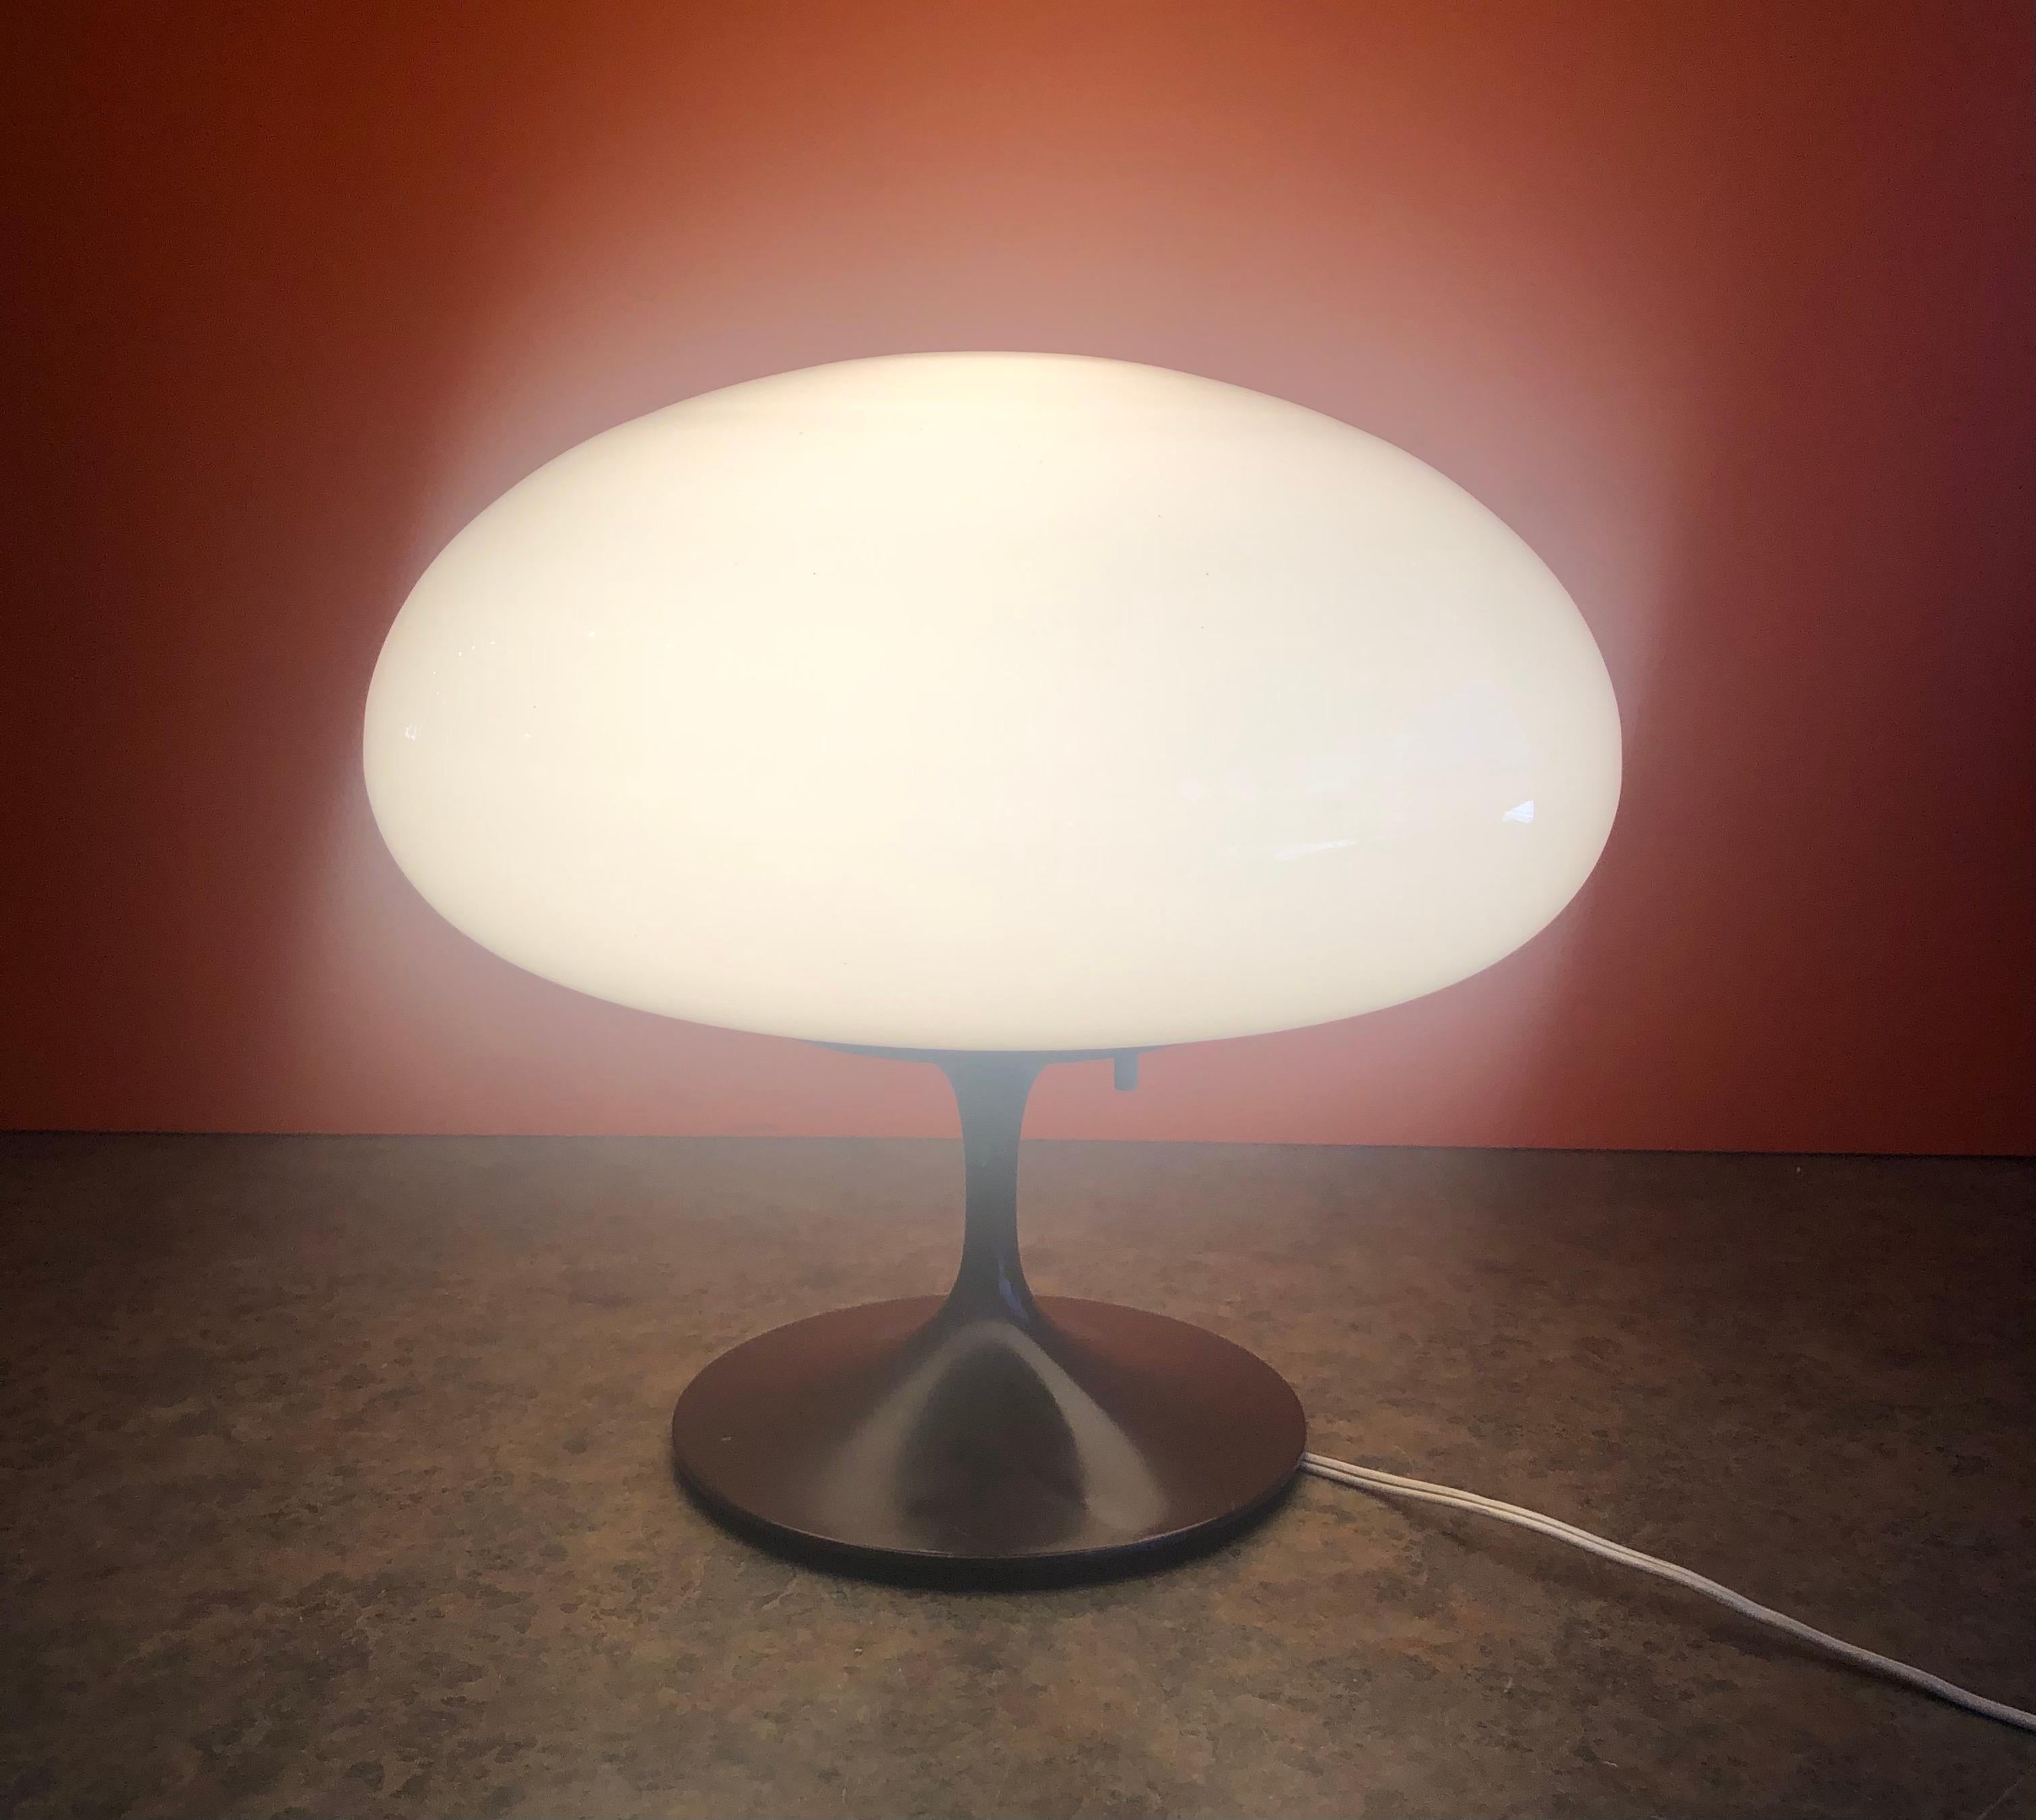 American Low Mushroom Lamp with Brown Base and Art Glass Shade by Laurel Lamp Co.